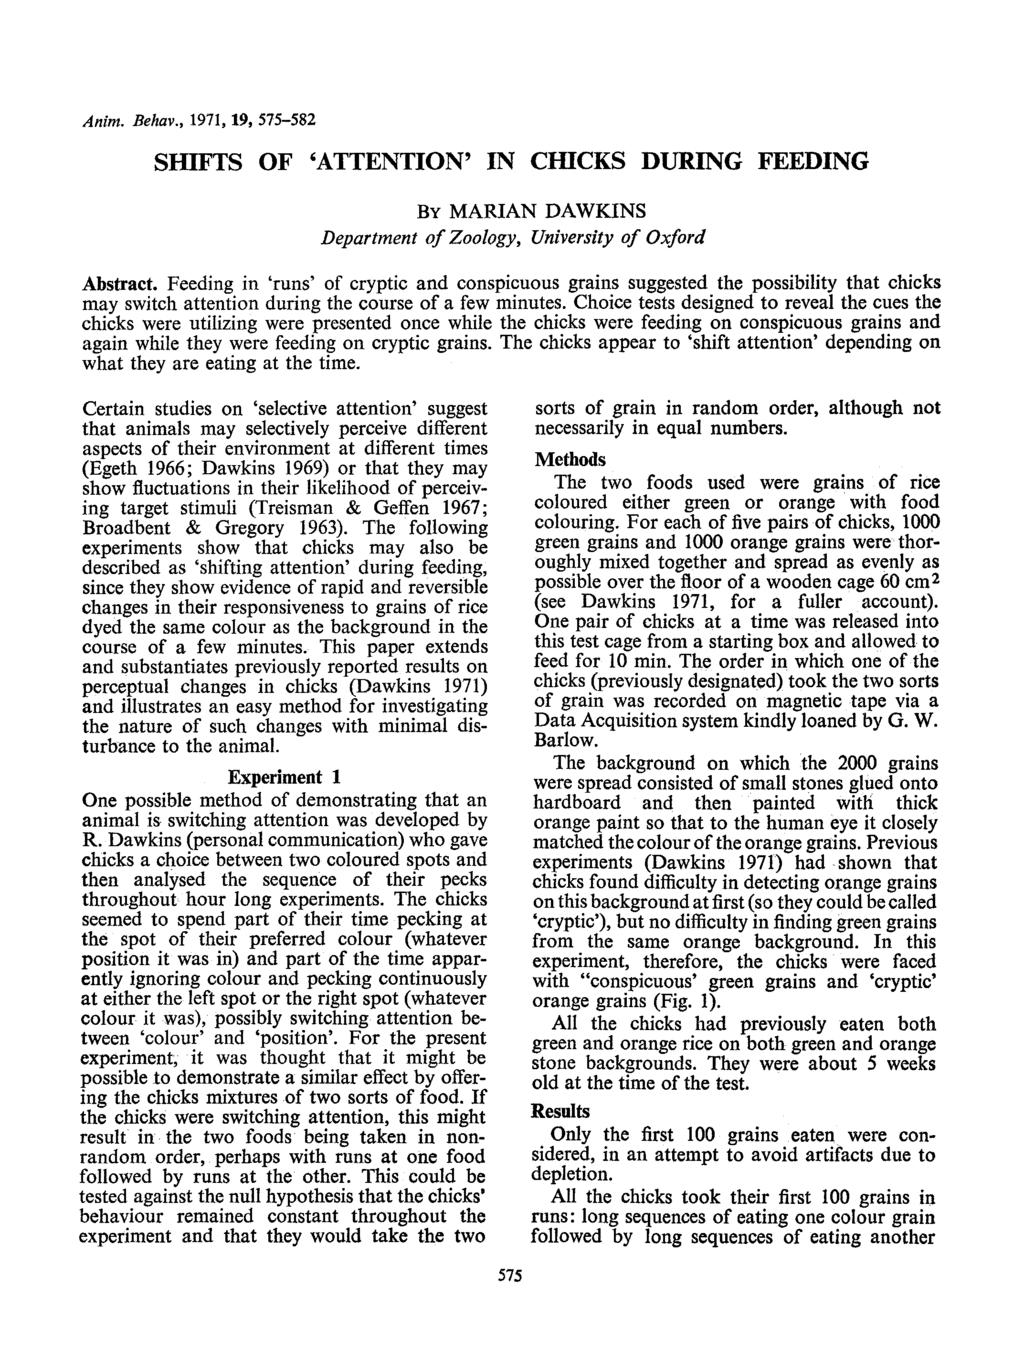 AnOn. Behav., 1971, 19, 575-582 SHIFTS OF 'ATTENTION' IN CHICKS DURING FEEDING BY MARIAN DAWKINS Department of Zoology, University of Oxford Abstract.